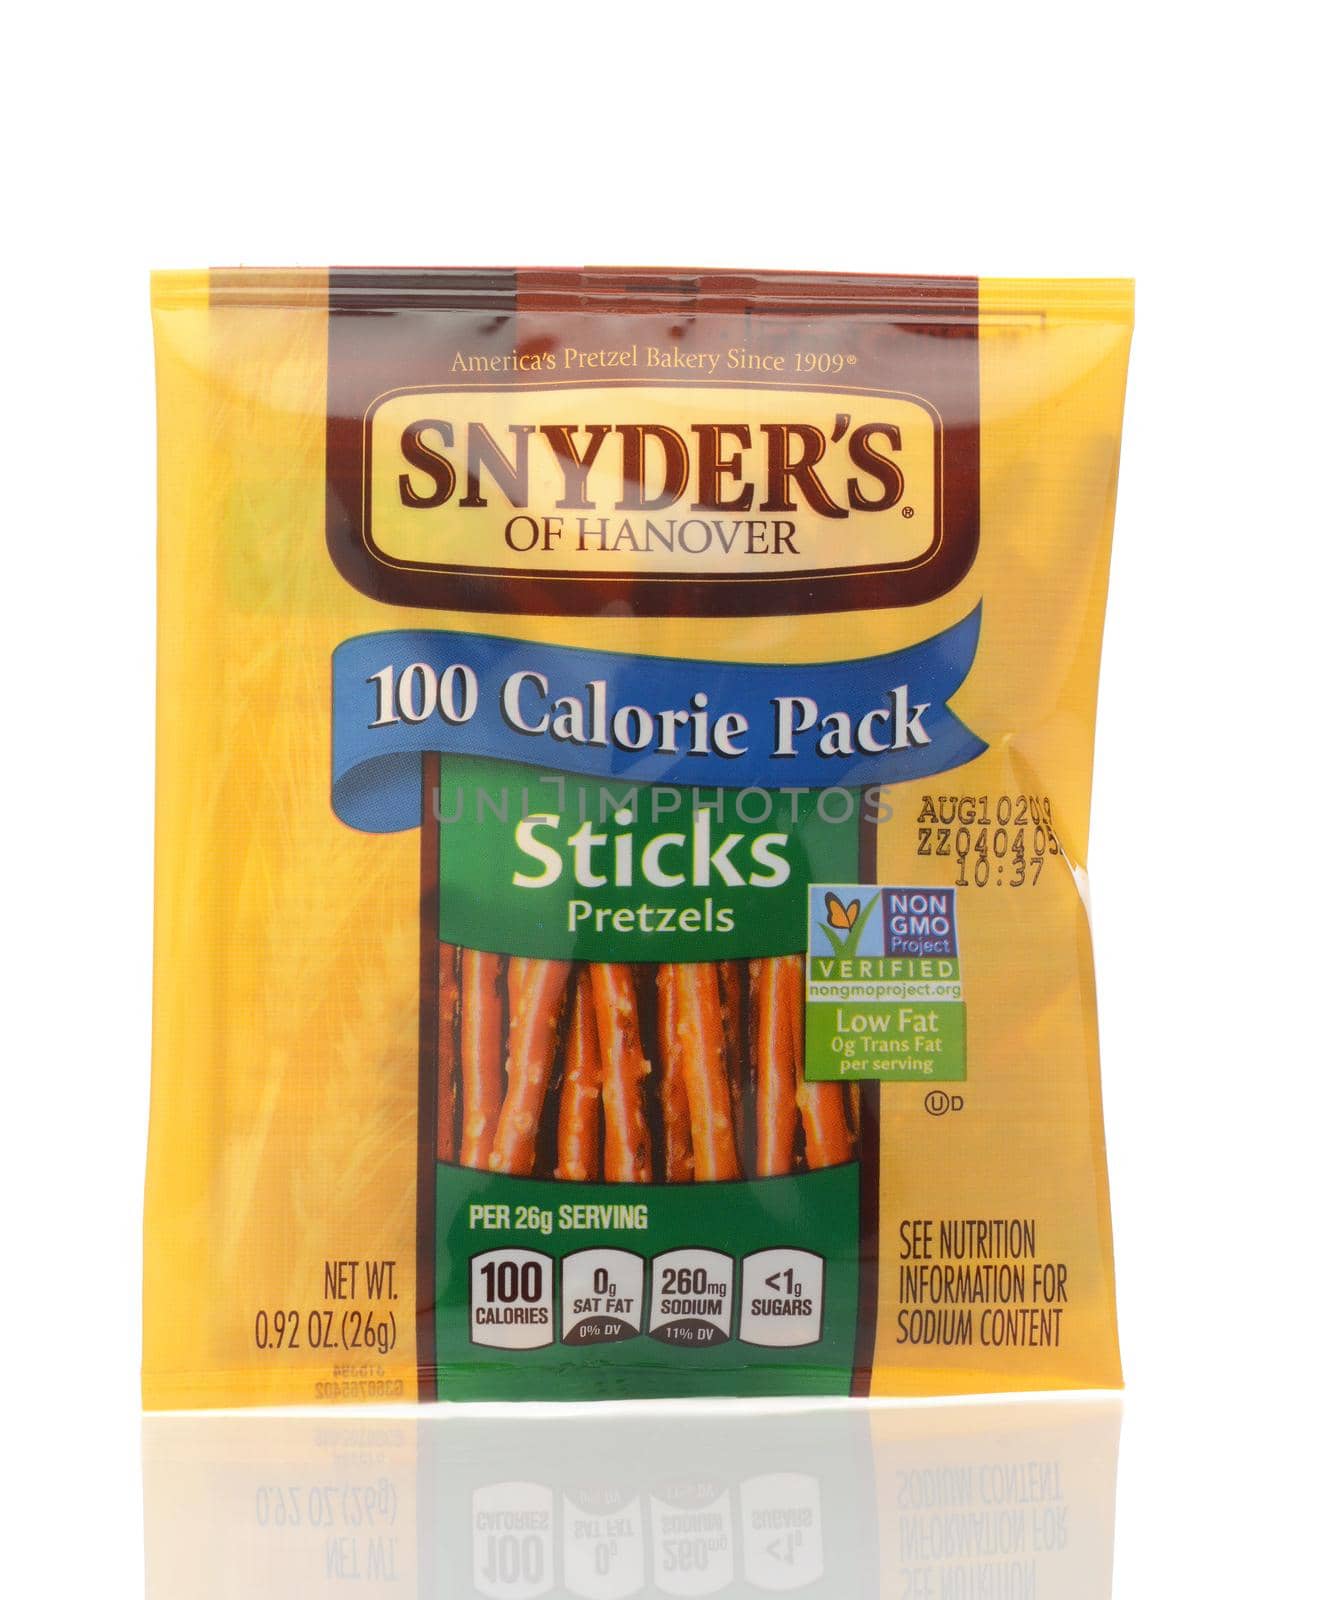 IRVINE, CALIFORNIA - MAY 22, 2019:  A package of Snyders of Hanover Pretzel Sticks. 